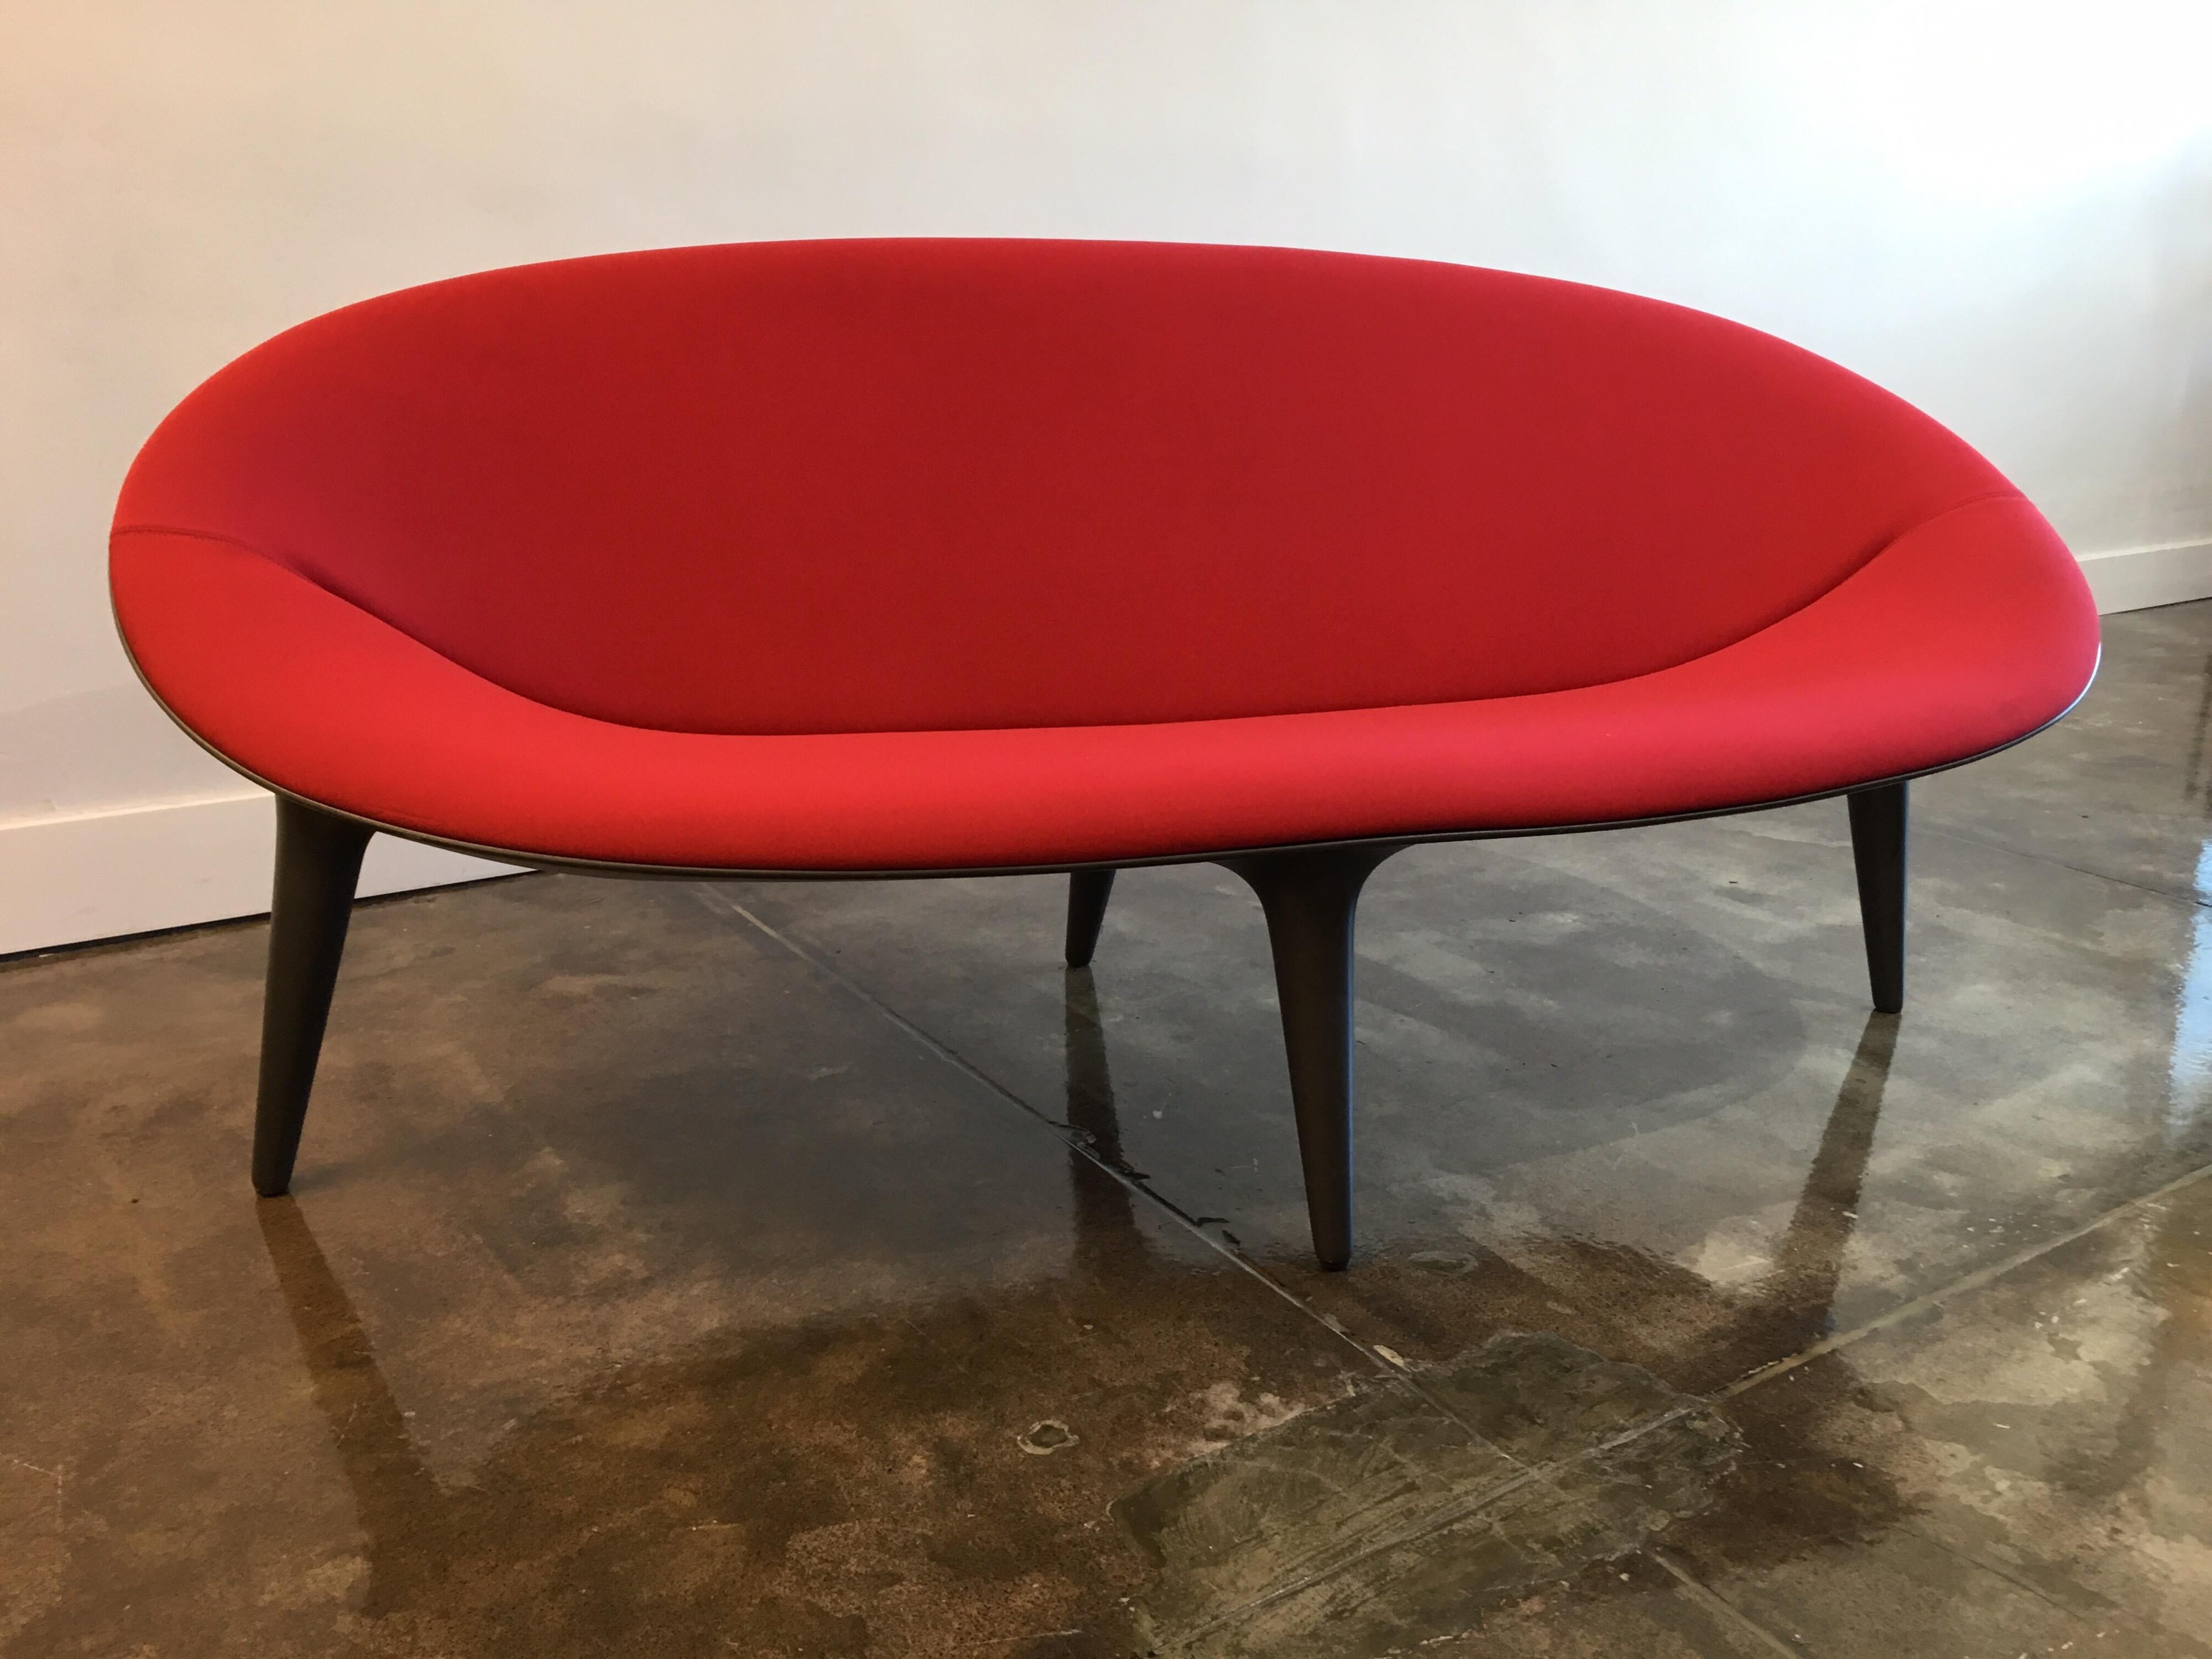 Phillips Starck 'Strange Thing' Sofa for Cassina. 

Unique sculptural biomorphic design, very desirable, rare Strange Thing sofa produced by Cassina, Italy in 2002. Very limited production, featuring Red Giano neoprene fabric with a Titanium grey